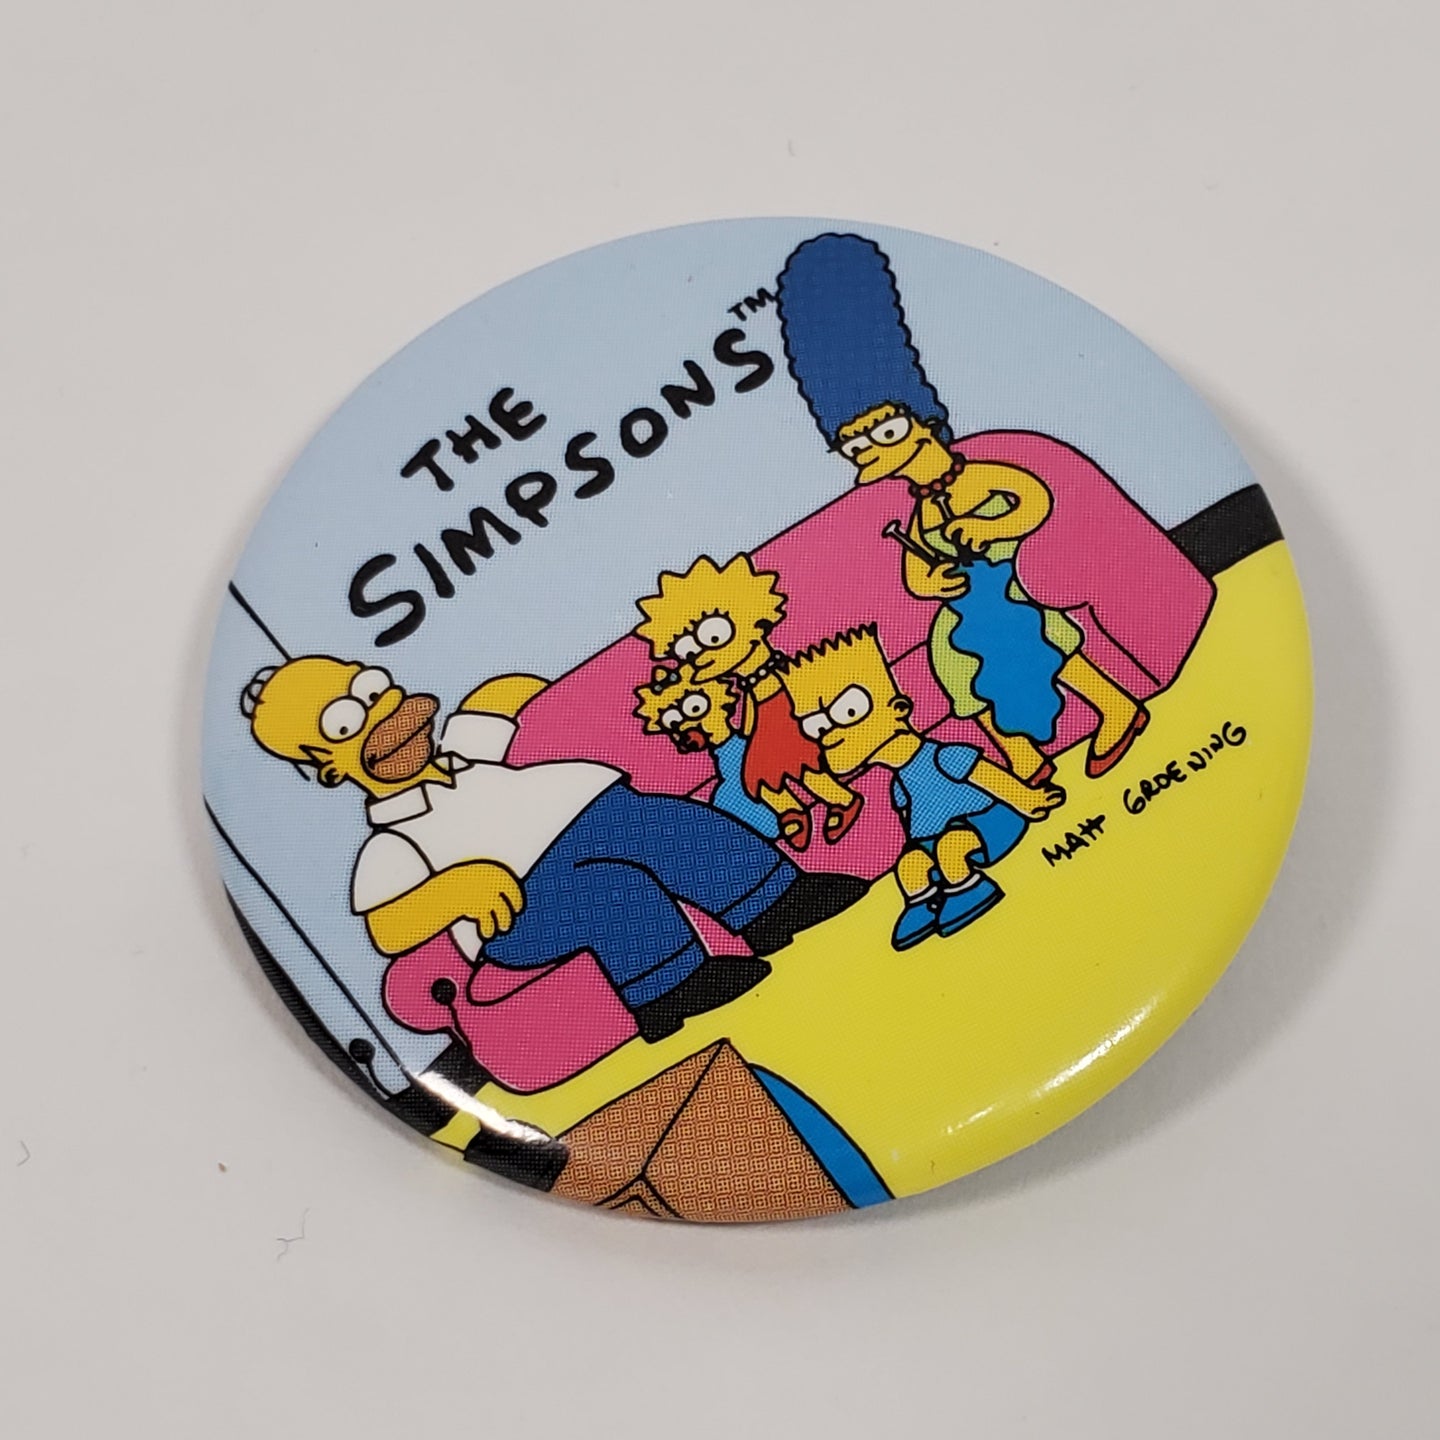 Vintage 1989 The Simpsons Button 20th Century Fox